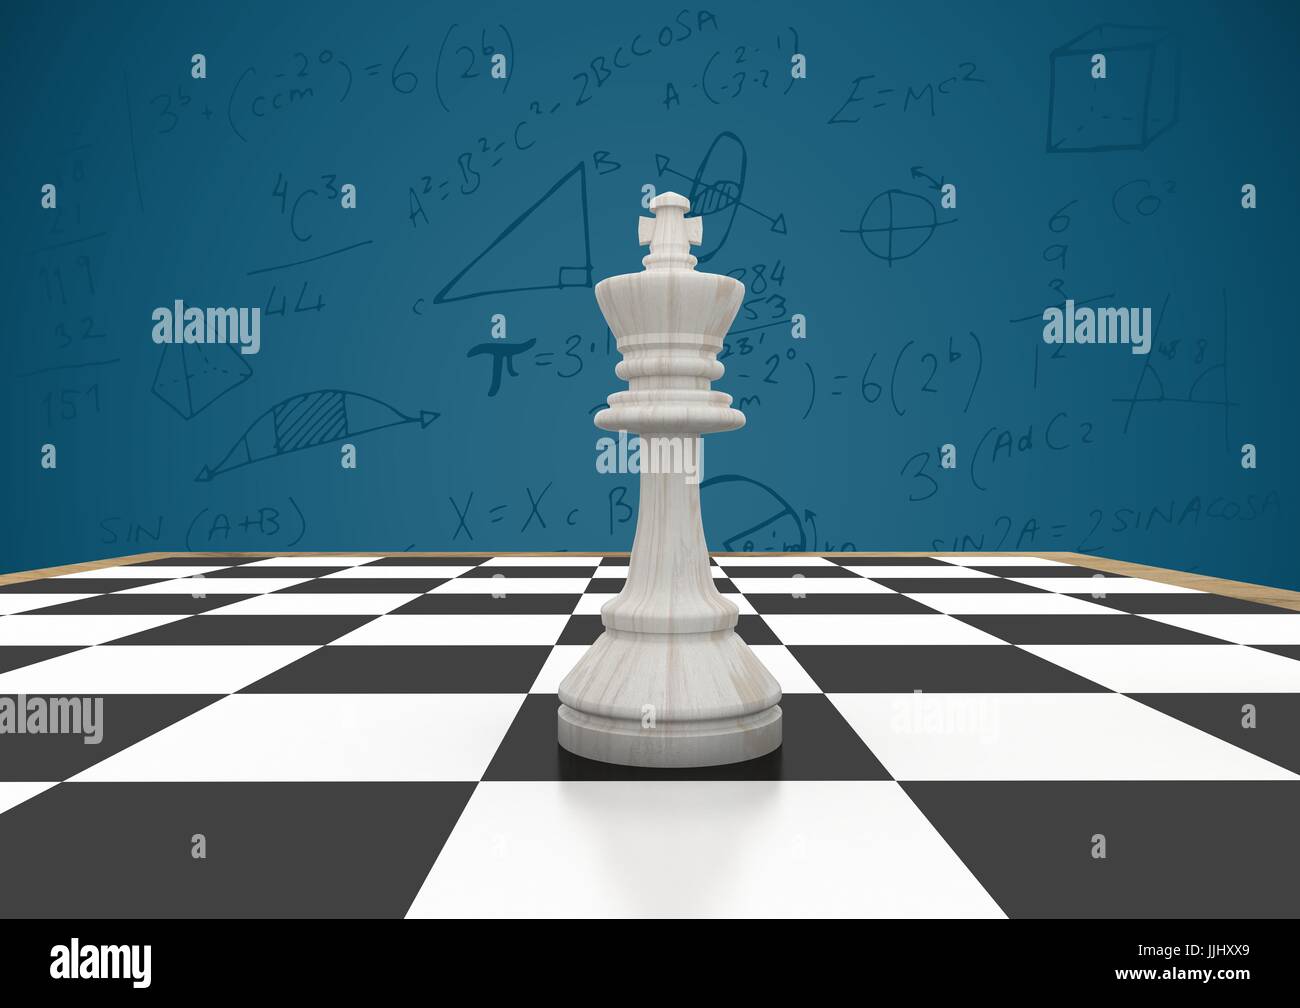 3D Chess piece against blue background with math doodles Stock Photo